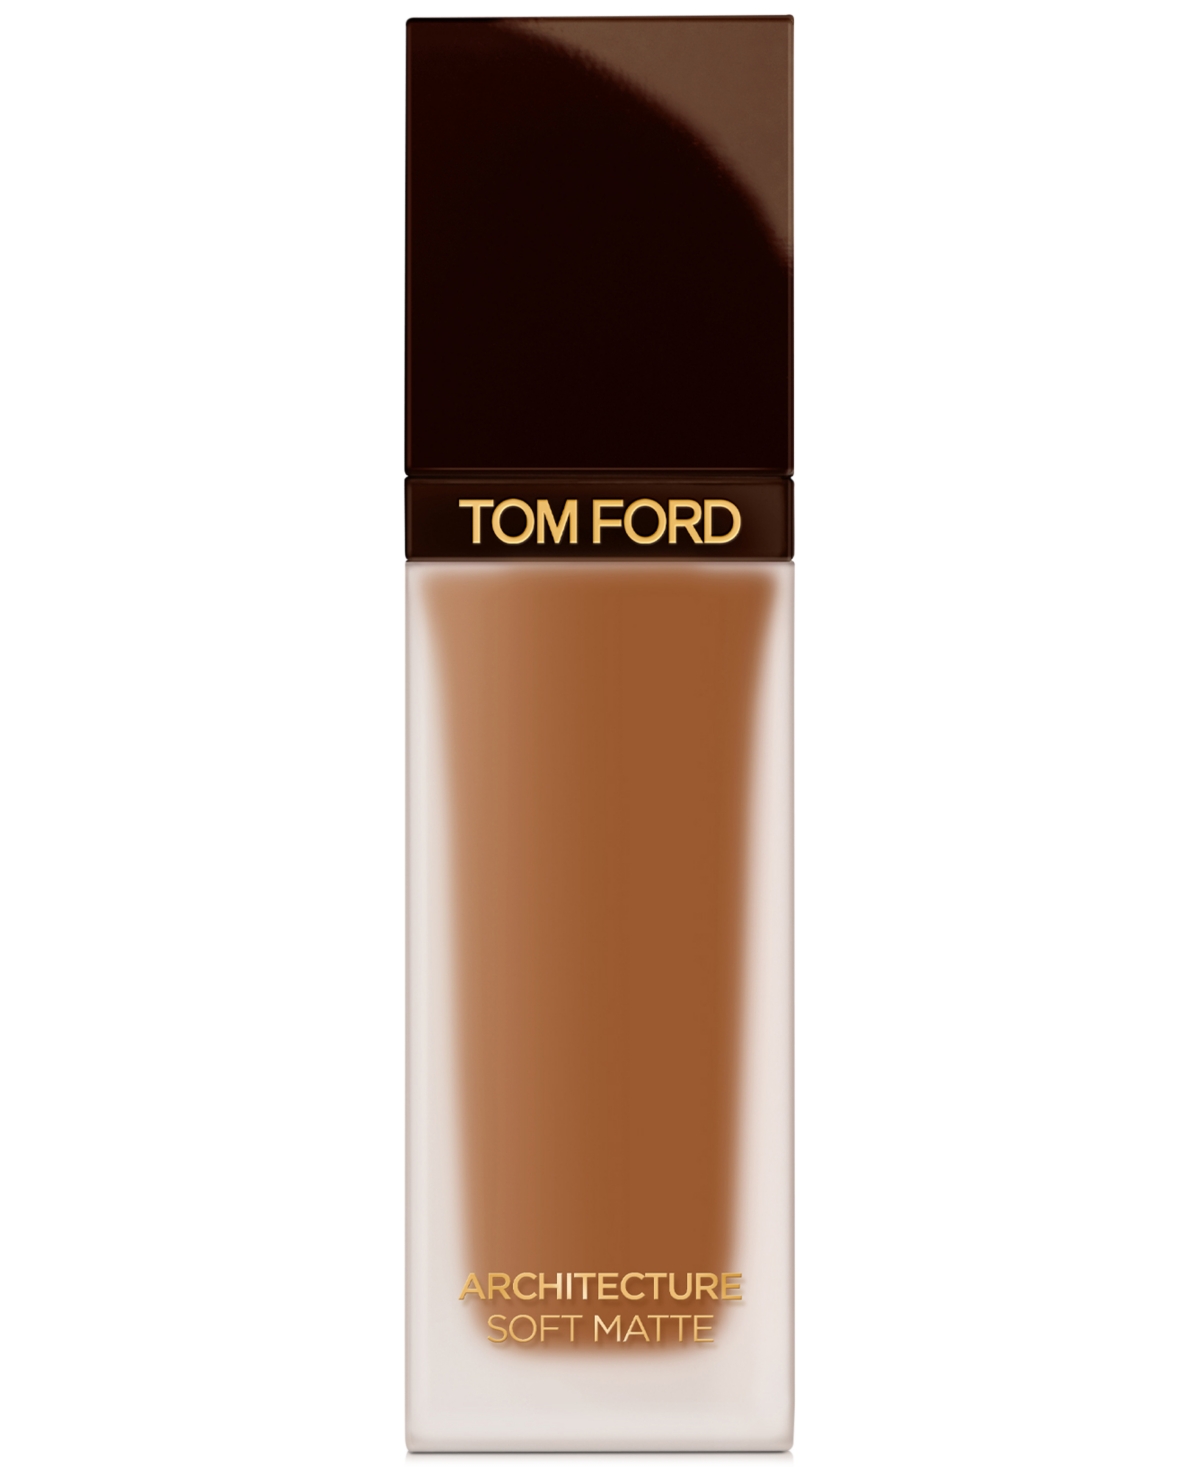 Shop Tom Ford Architecture Soft Matte Blurring Foundation In . Amber - Deep